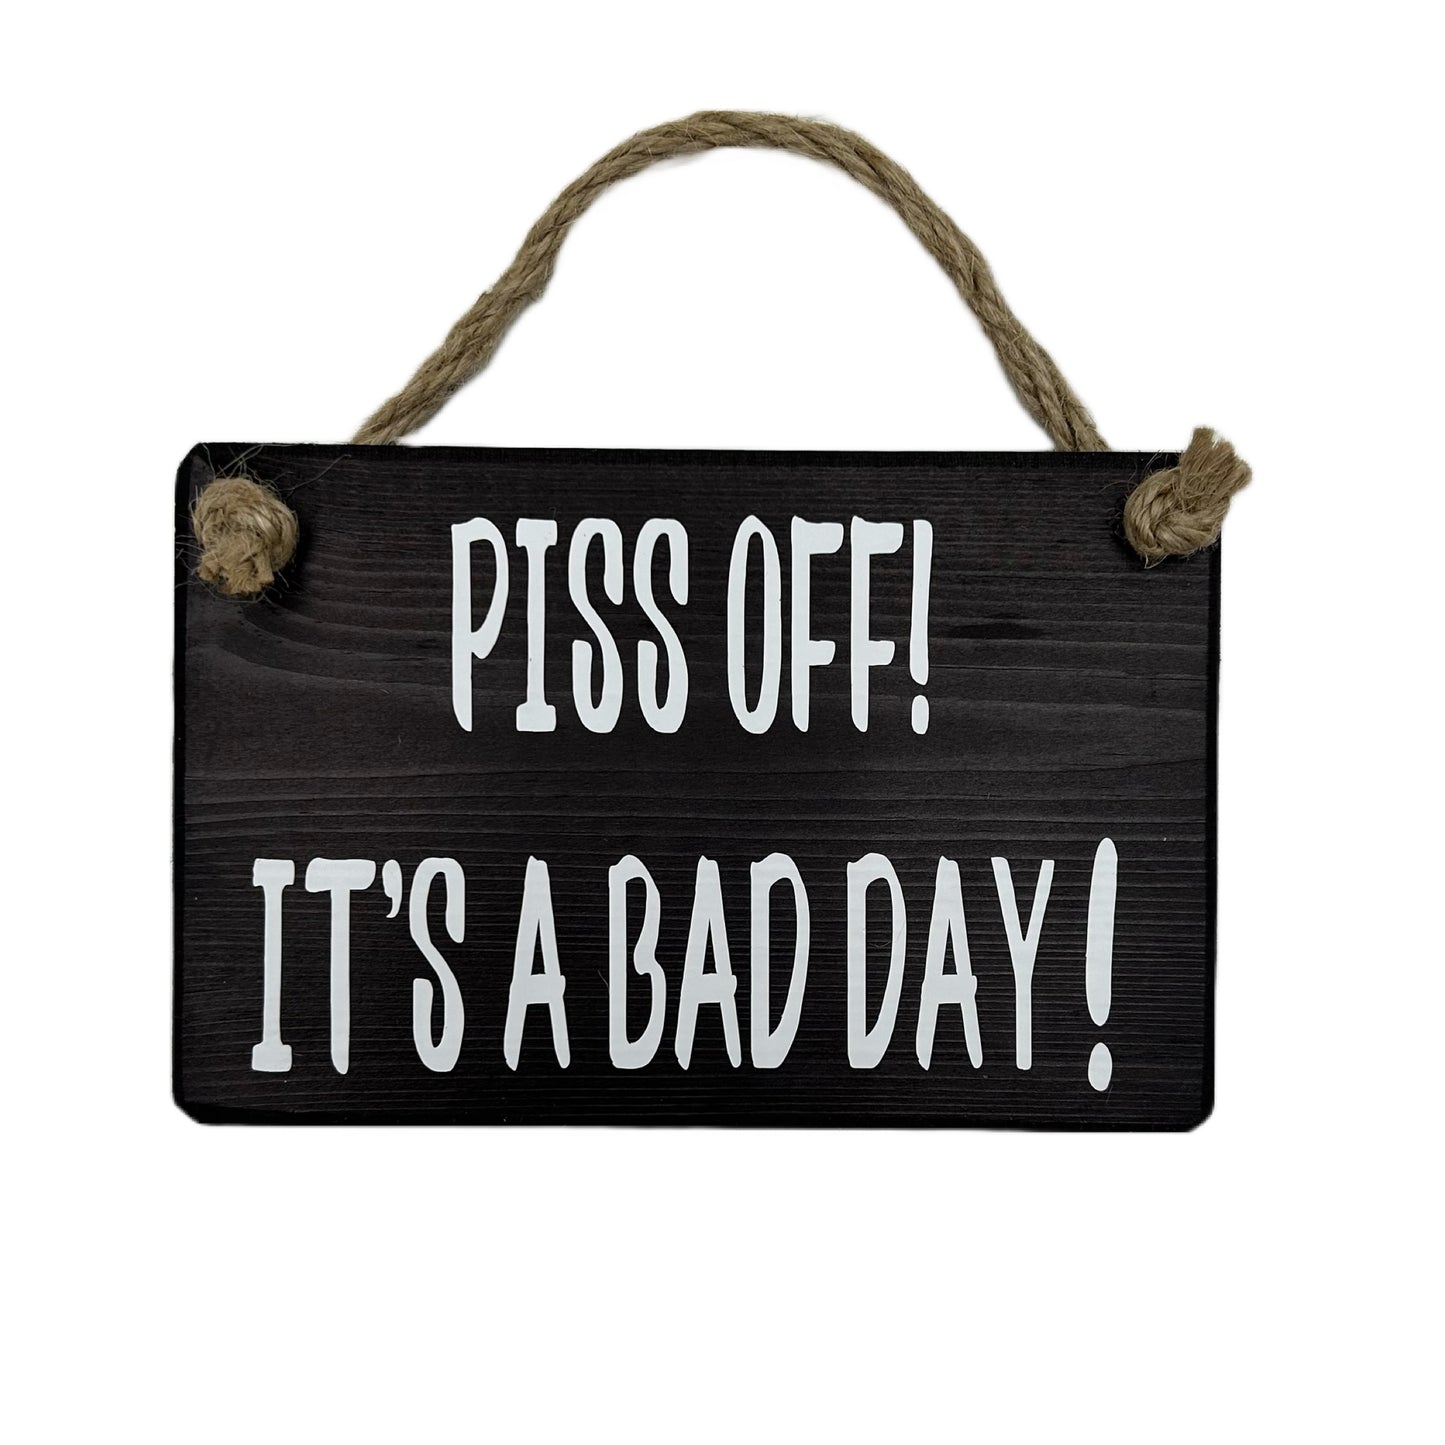 Piss Off! It's a bad day!